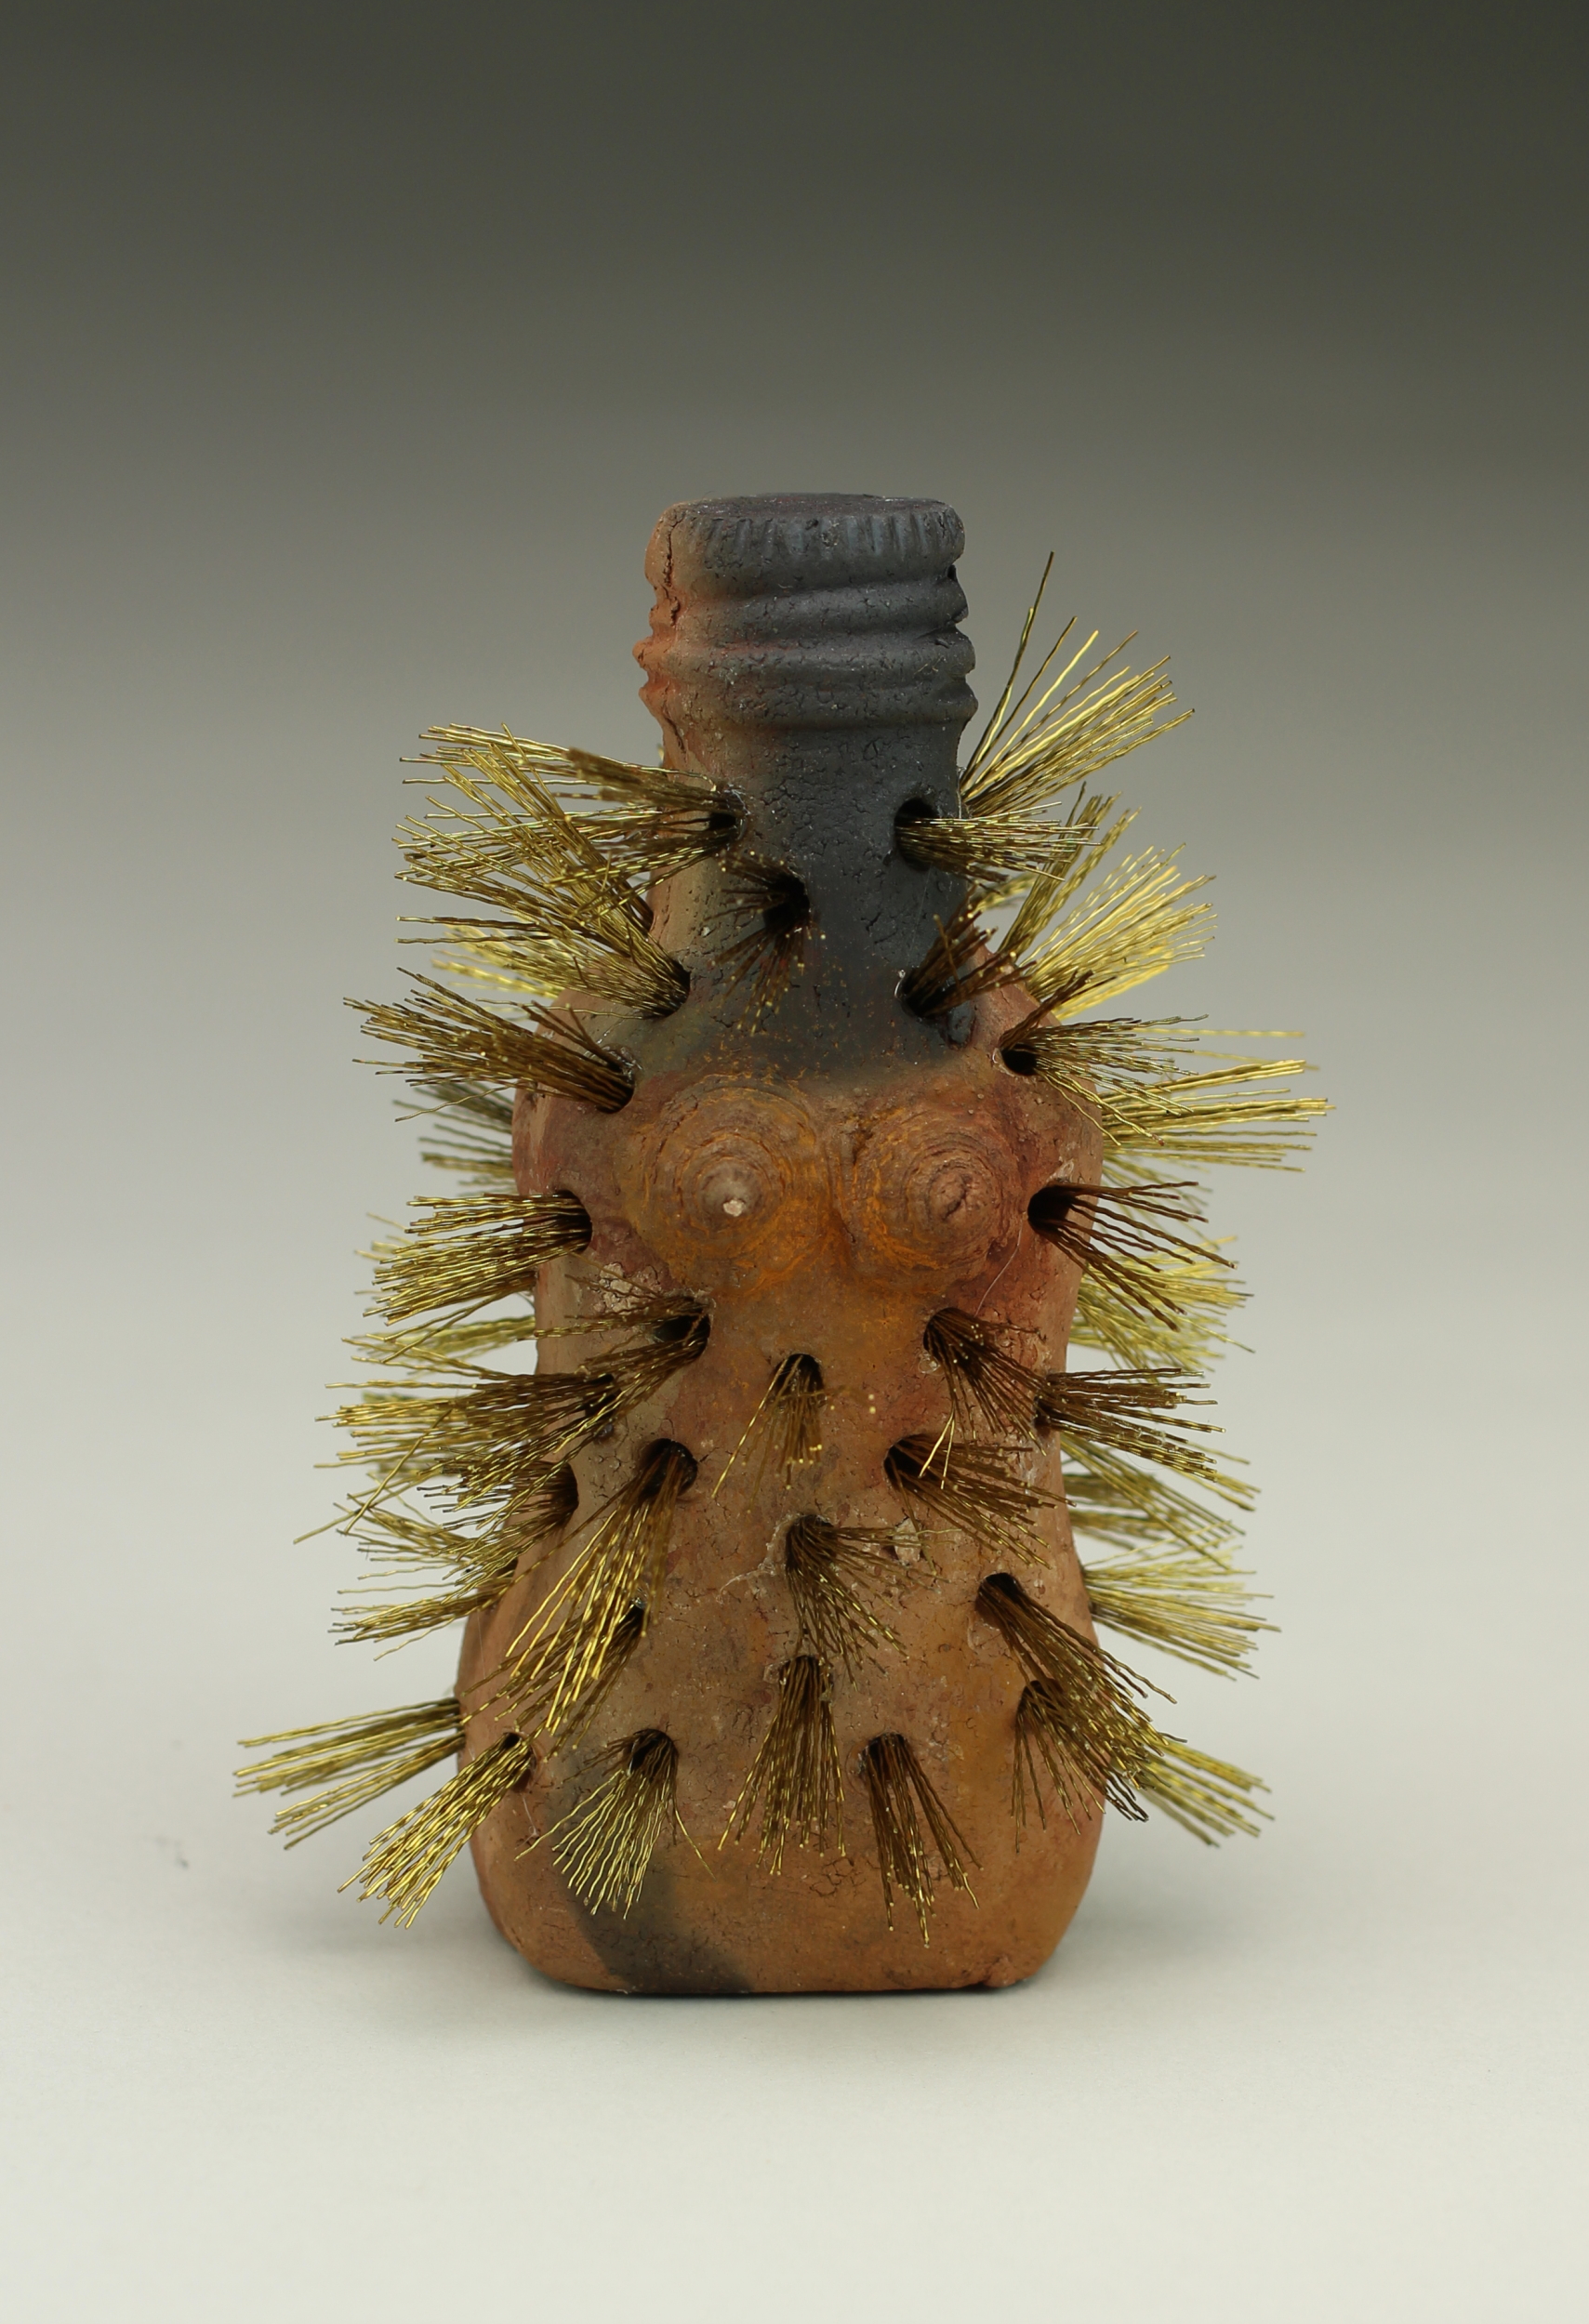 A ceramic bottle with metallic hair-like protrusions coming out from the inside.  